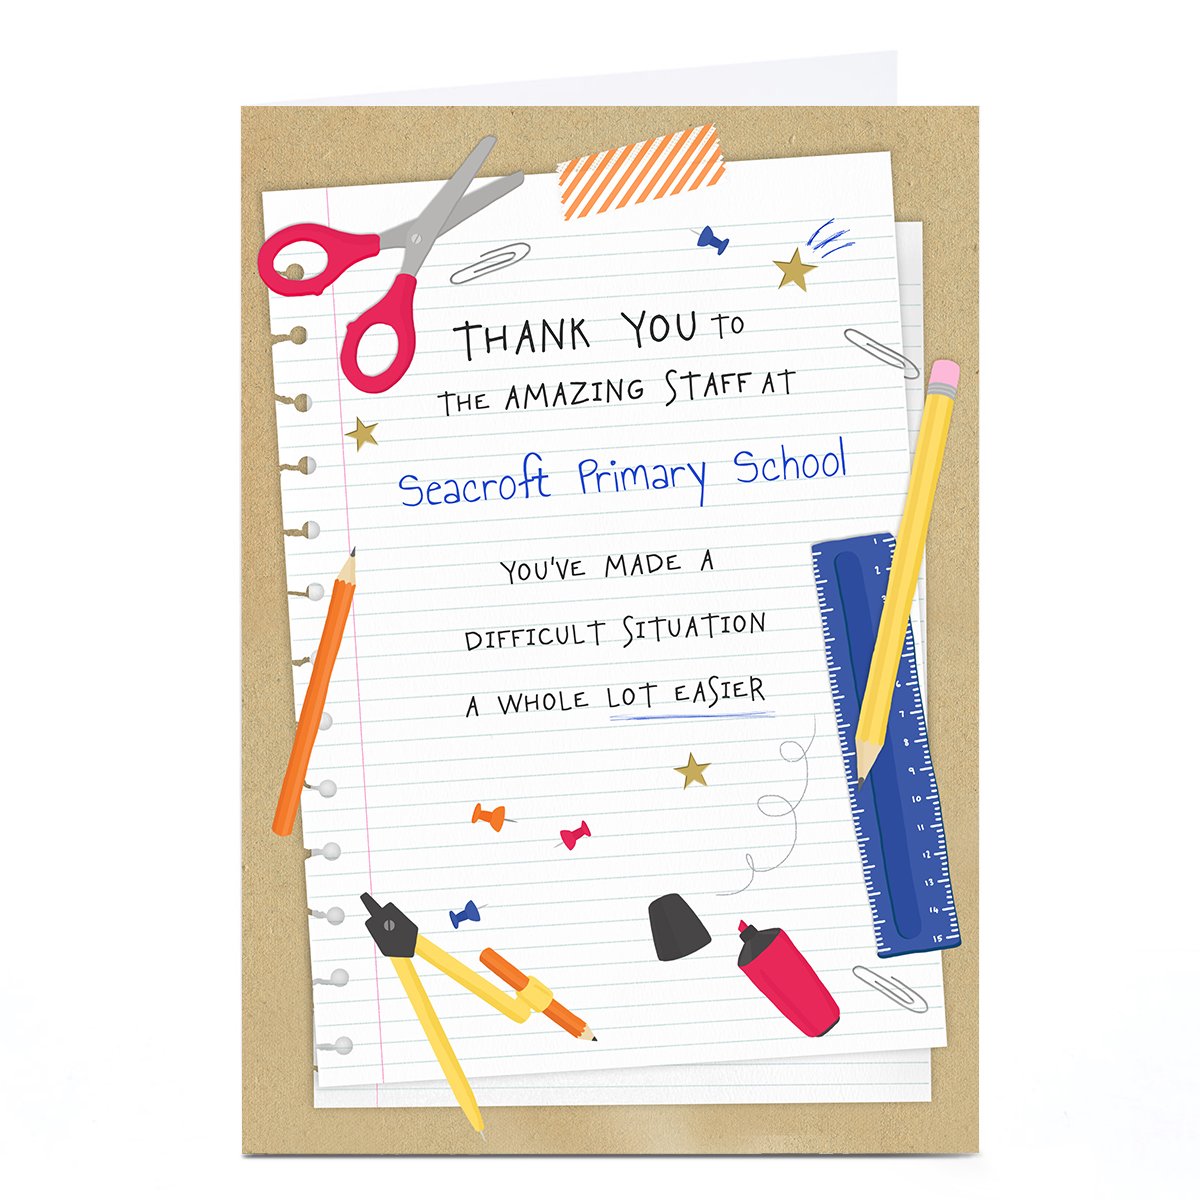 Personalised Thank You Card - A Whole Lot Easier